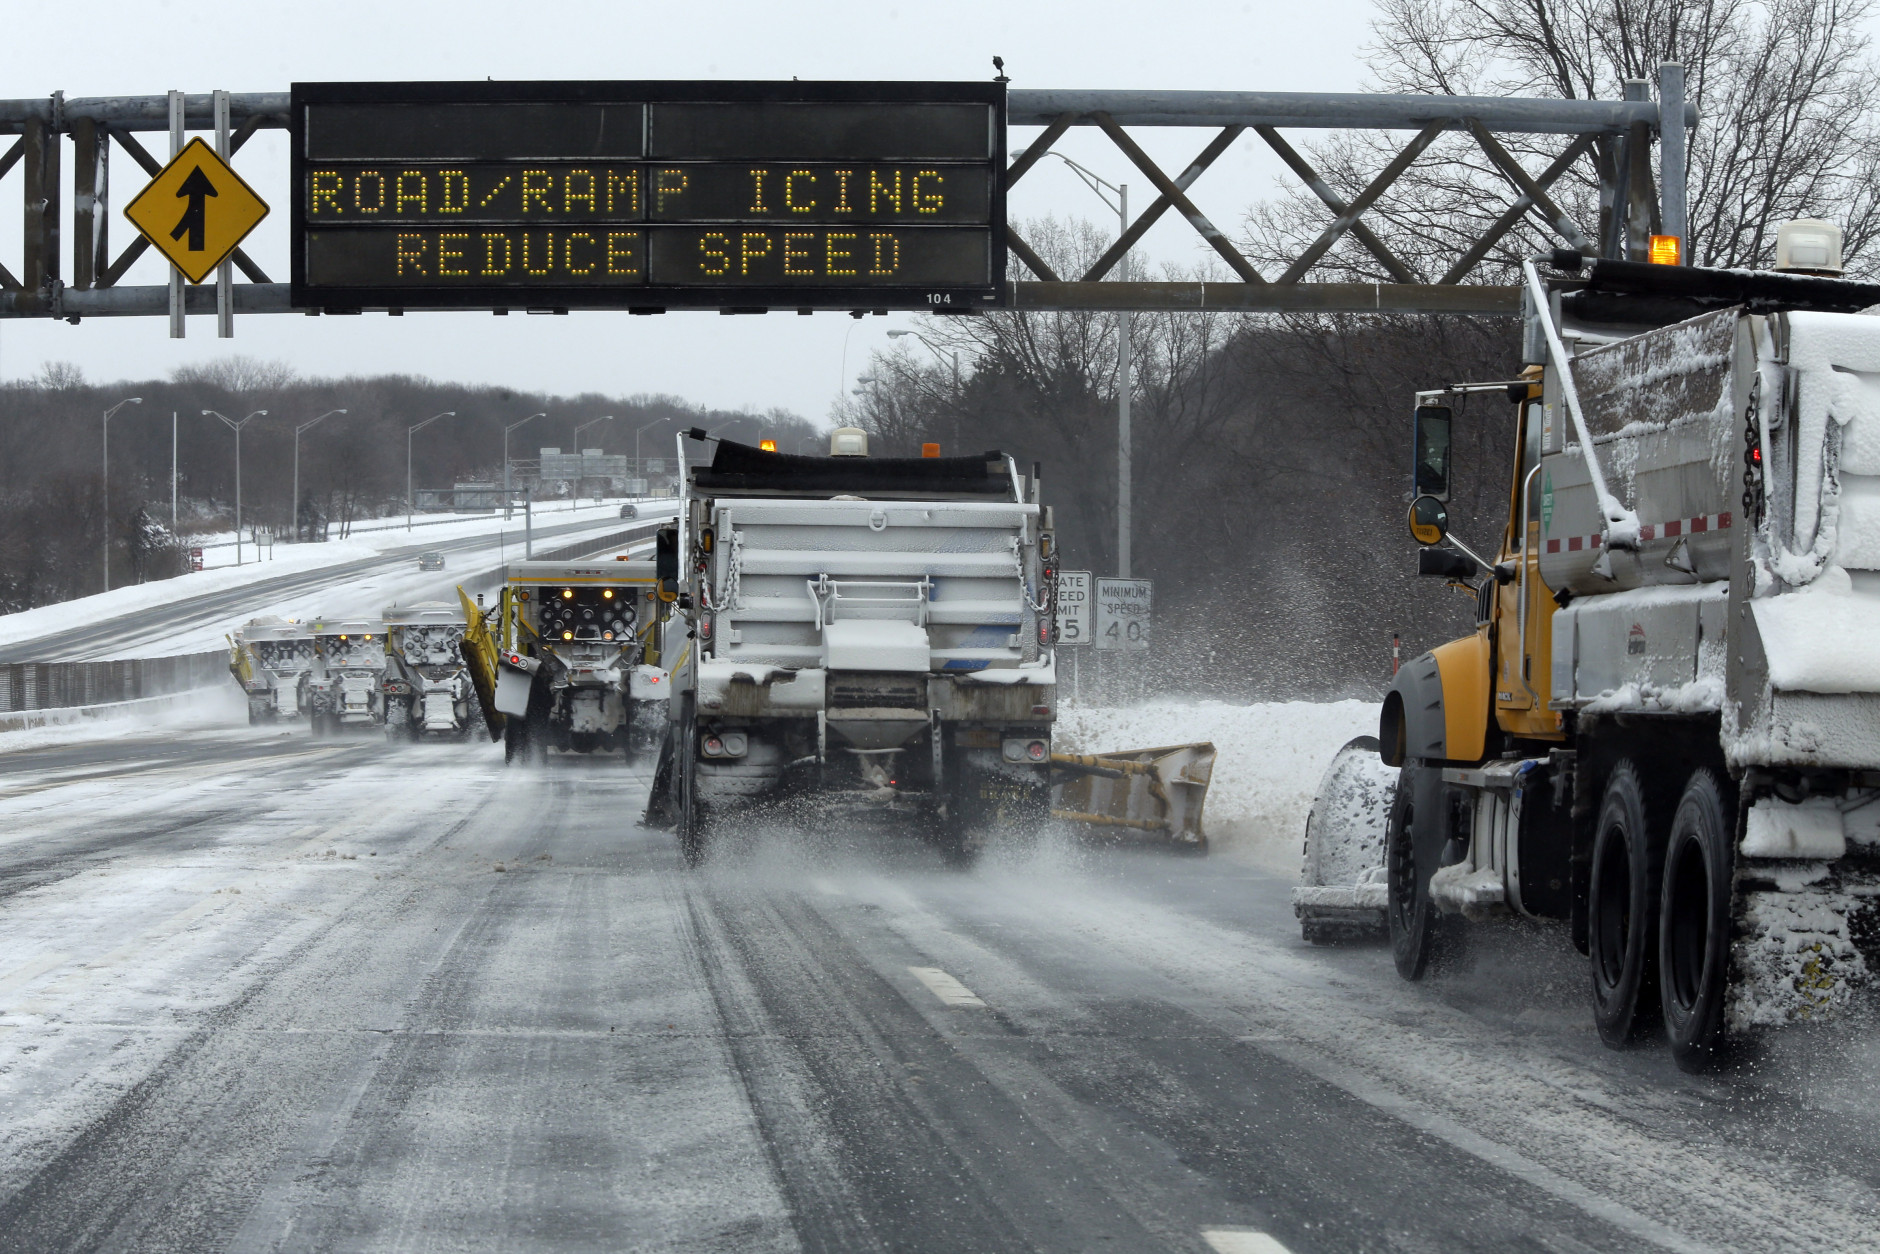 Snow plows clear the Long Island Expressway, Tuesday, Jan. 27, 2015 in Central Islip, N.Y.  A storm packing blizzard conditions spun up the East Coast early Tuesday, pounding coastal eastern Long Island into Maine with high winds and heavy snow. (AP Photo/Mary Altaffer)